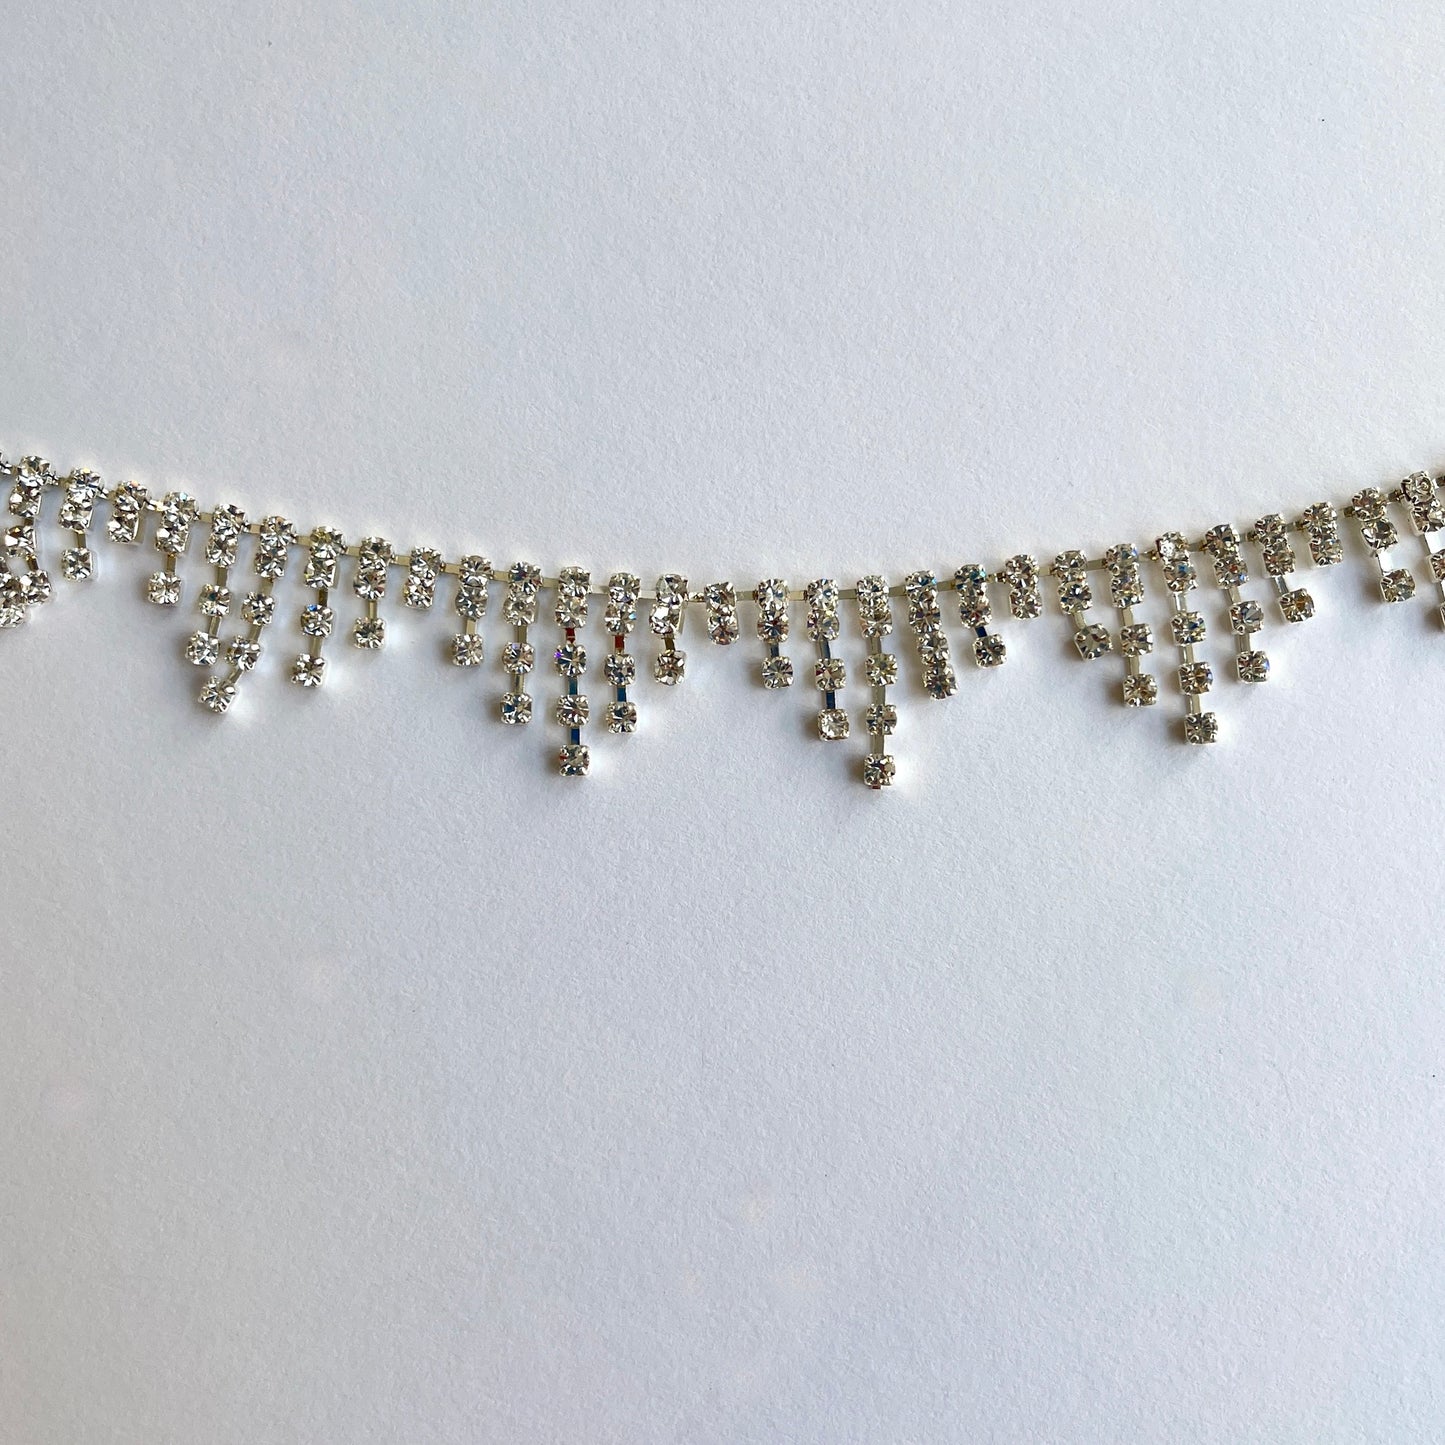 90cm length of a very sparkly rhinestone fringe trim made from premium high grade diamanté crystals set in a flexible metal chain casing. Popular for bridal wear, evening wear, crafts, jewellery and headband making.